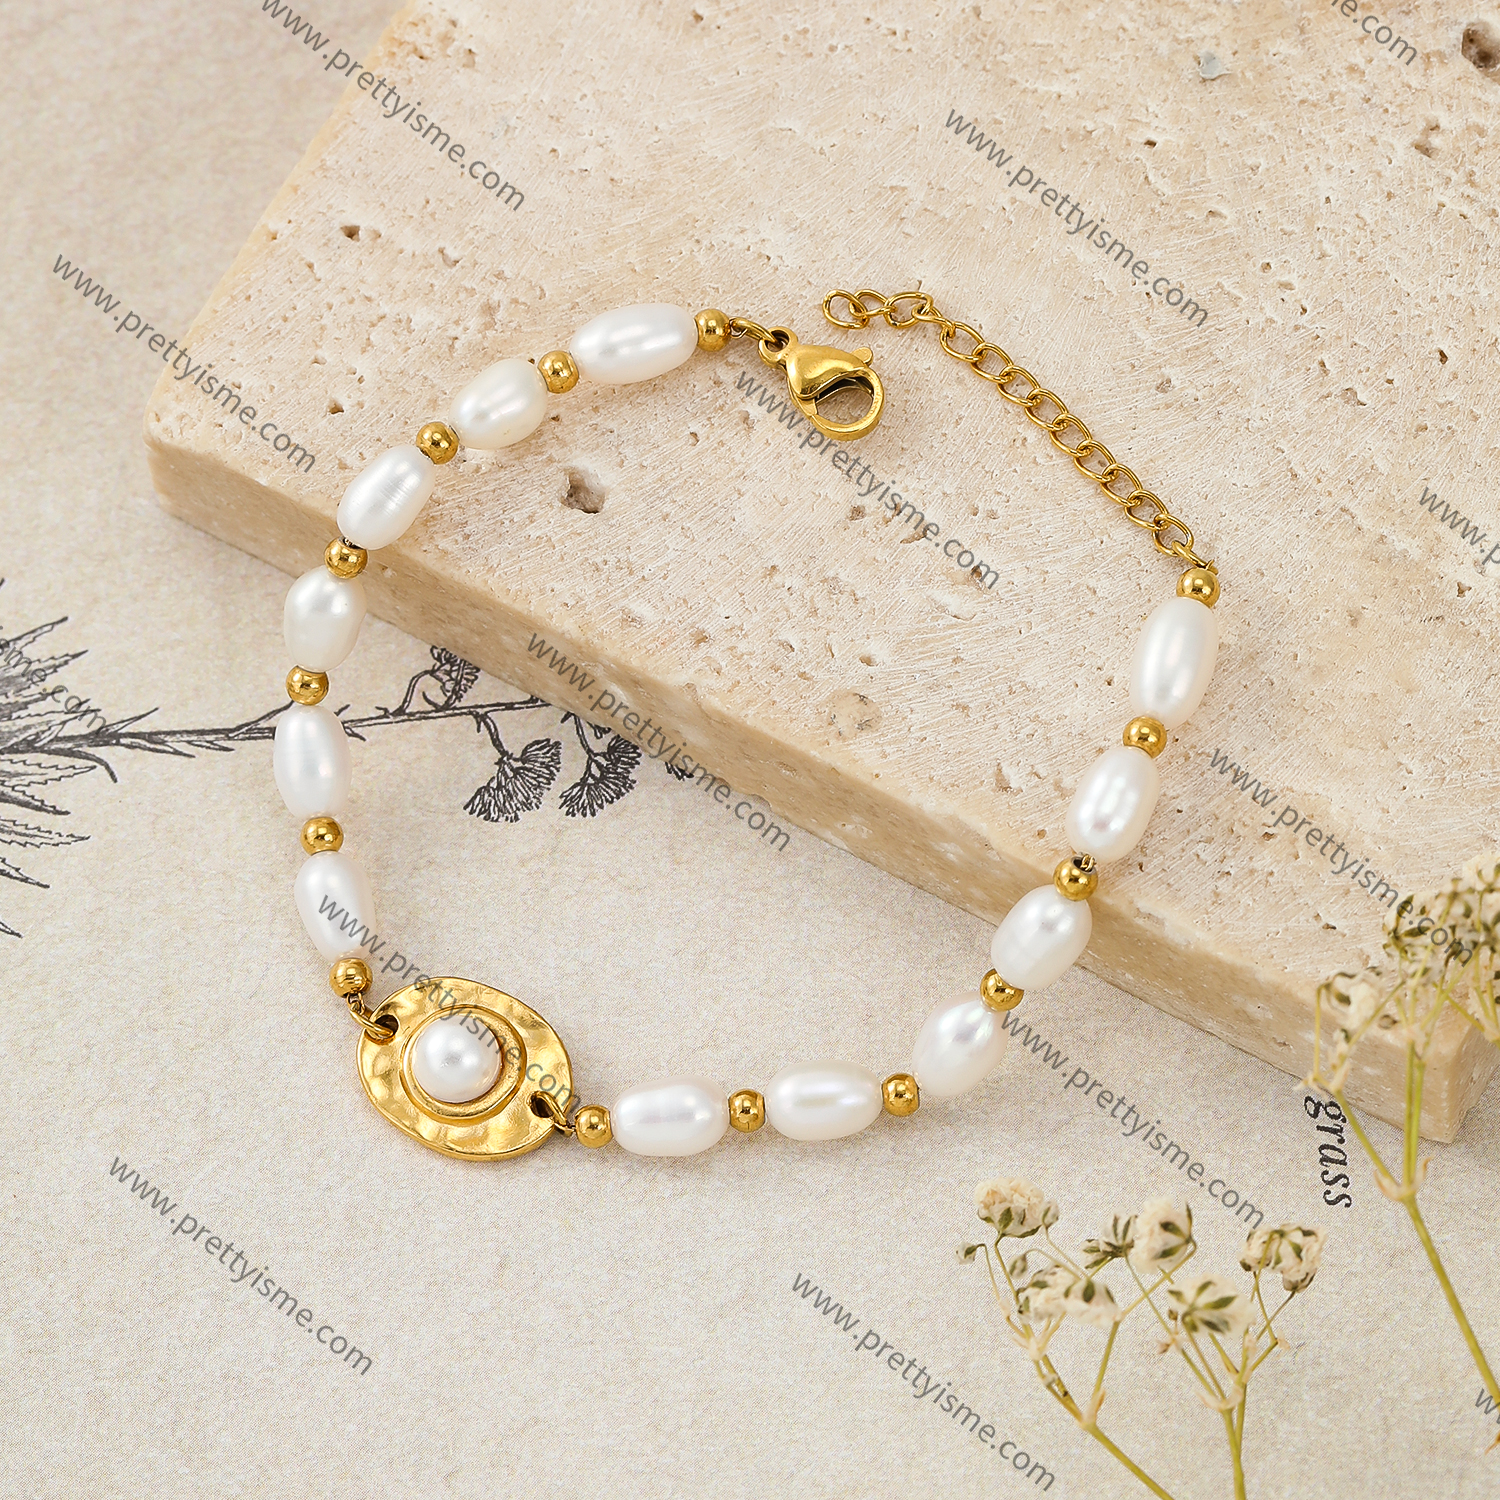 Pearl Bracelet Gold Plated 18K Gentle Delicate Bracelet with Small Gold Beads (2).webp